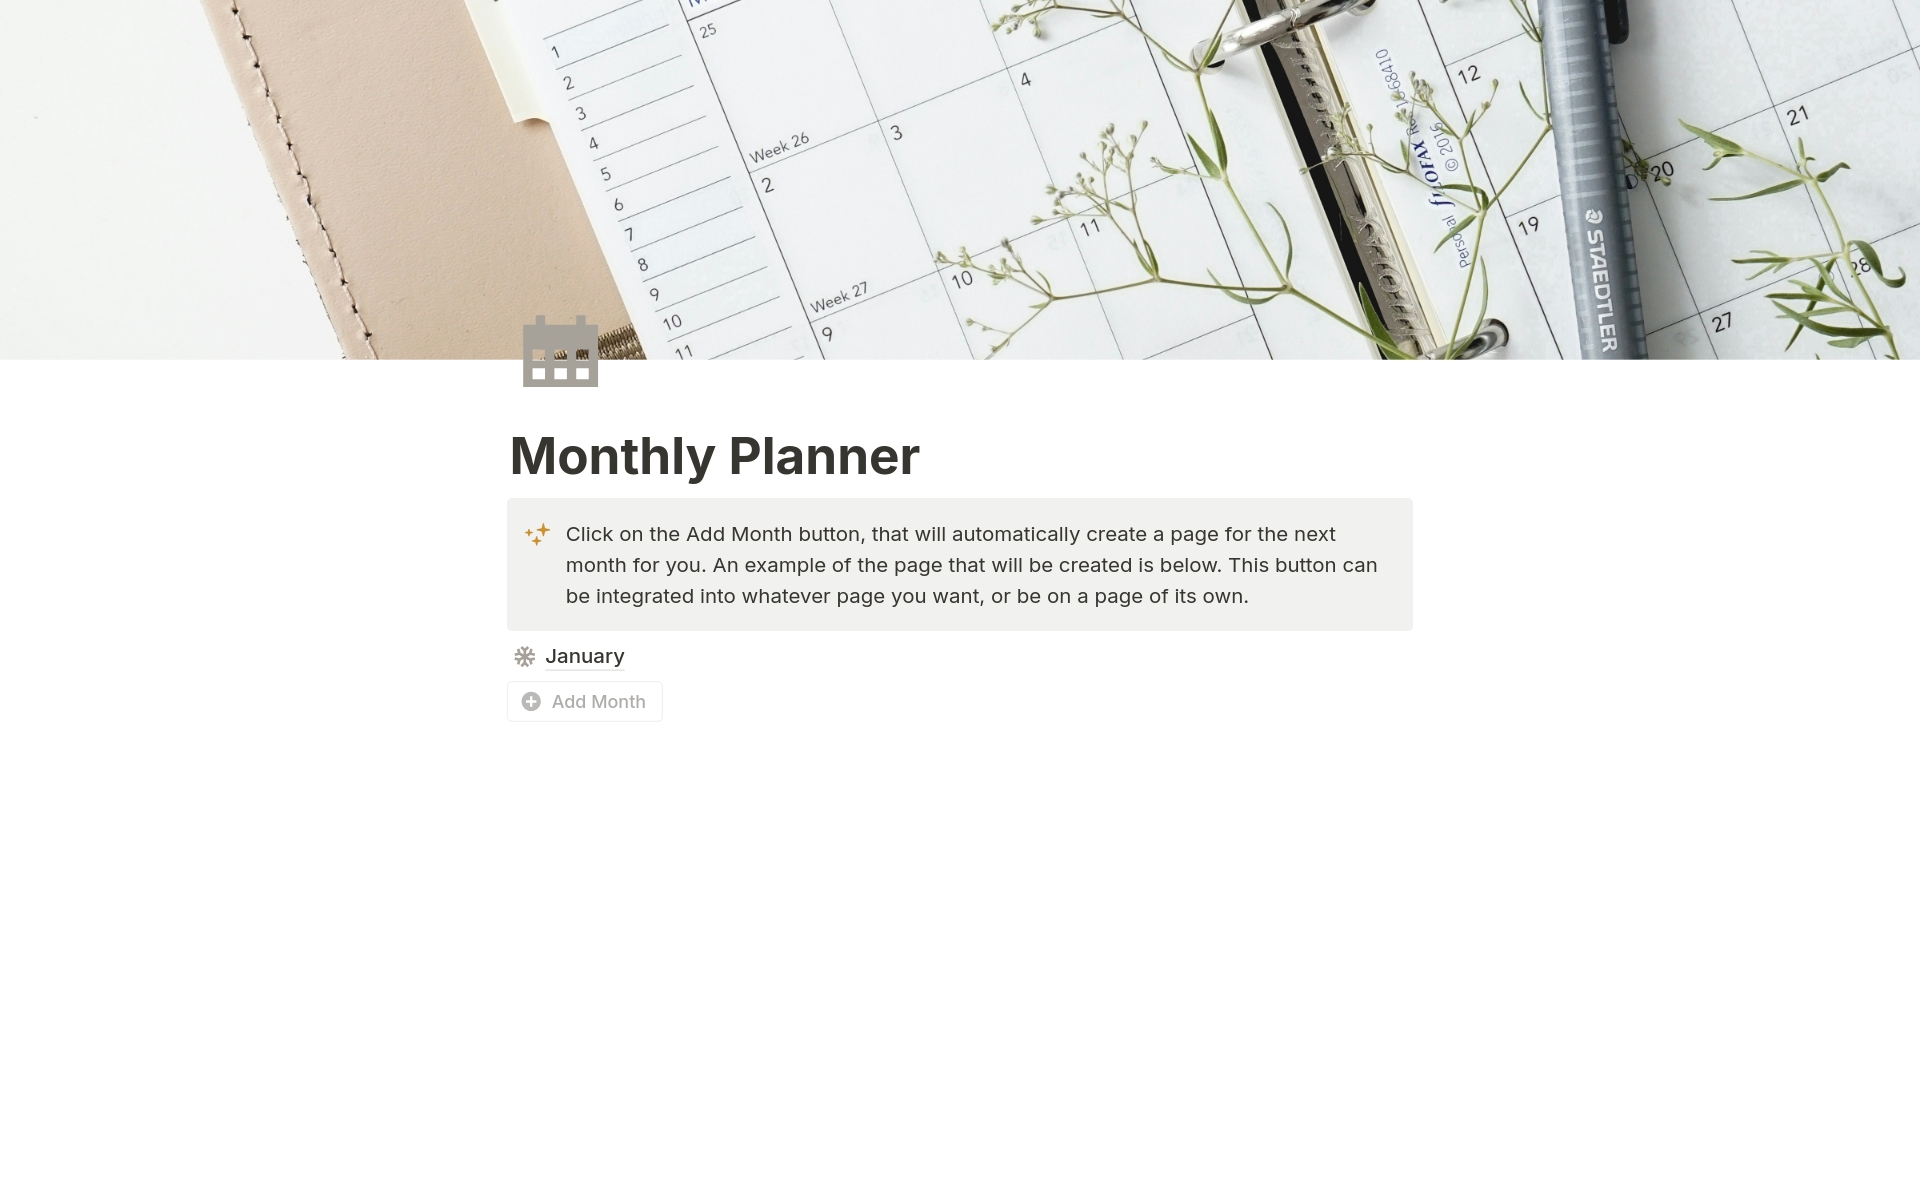 Monthly planner template with fully working automated buttons to make planning your days easier.